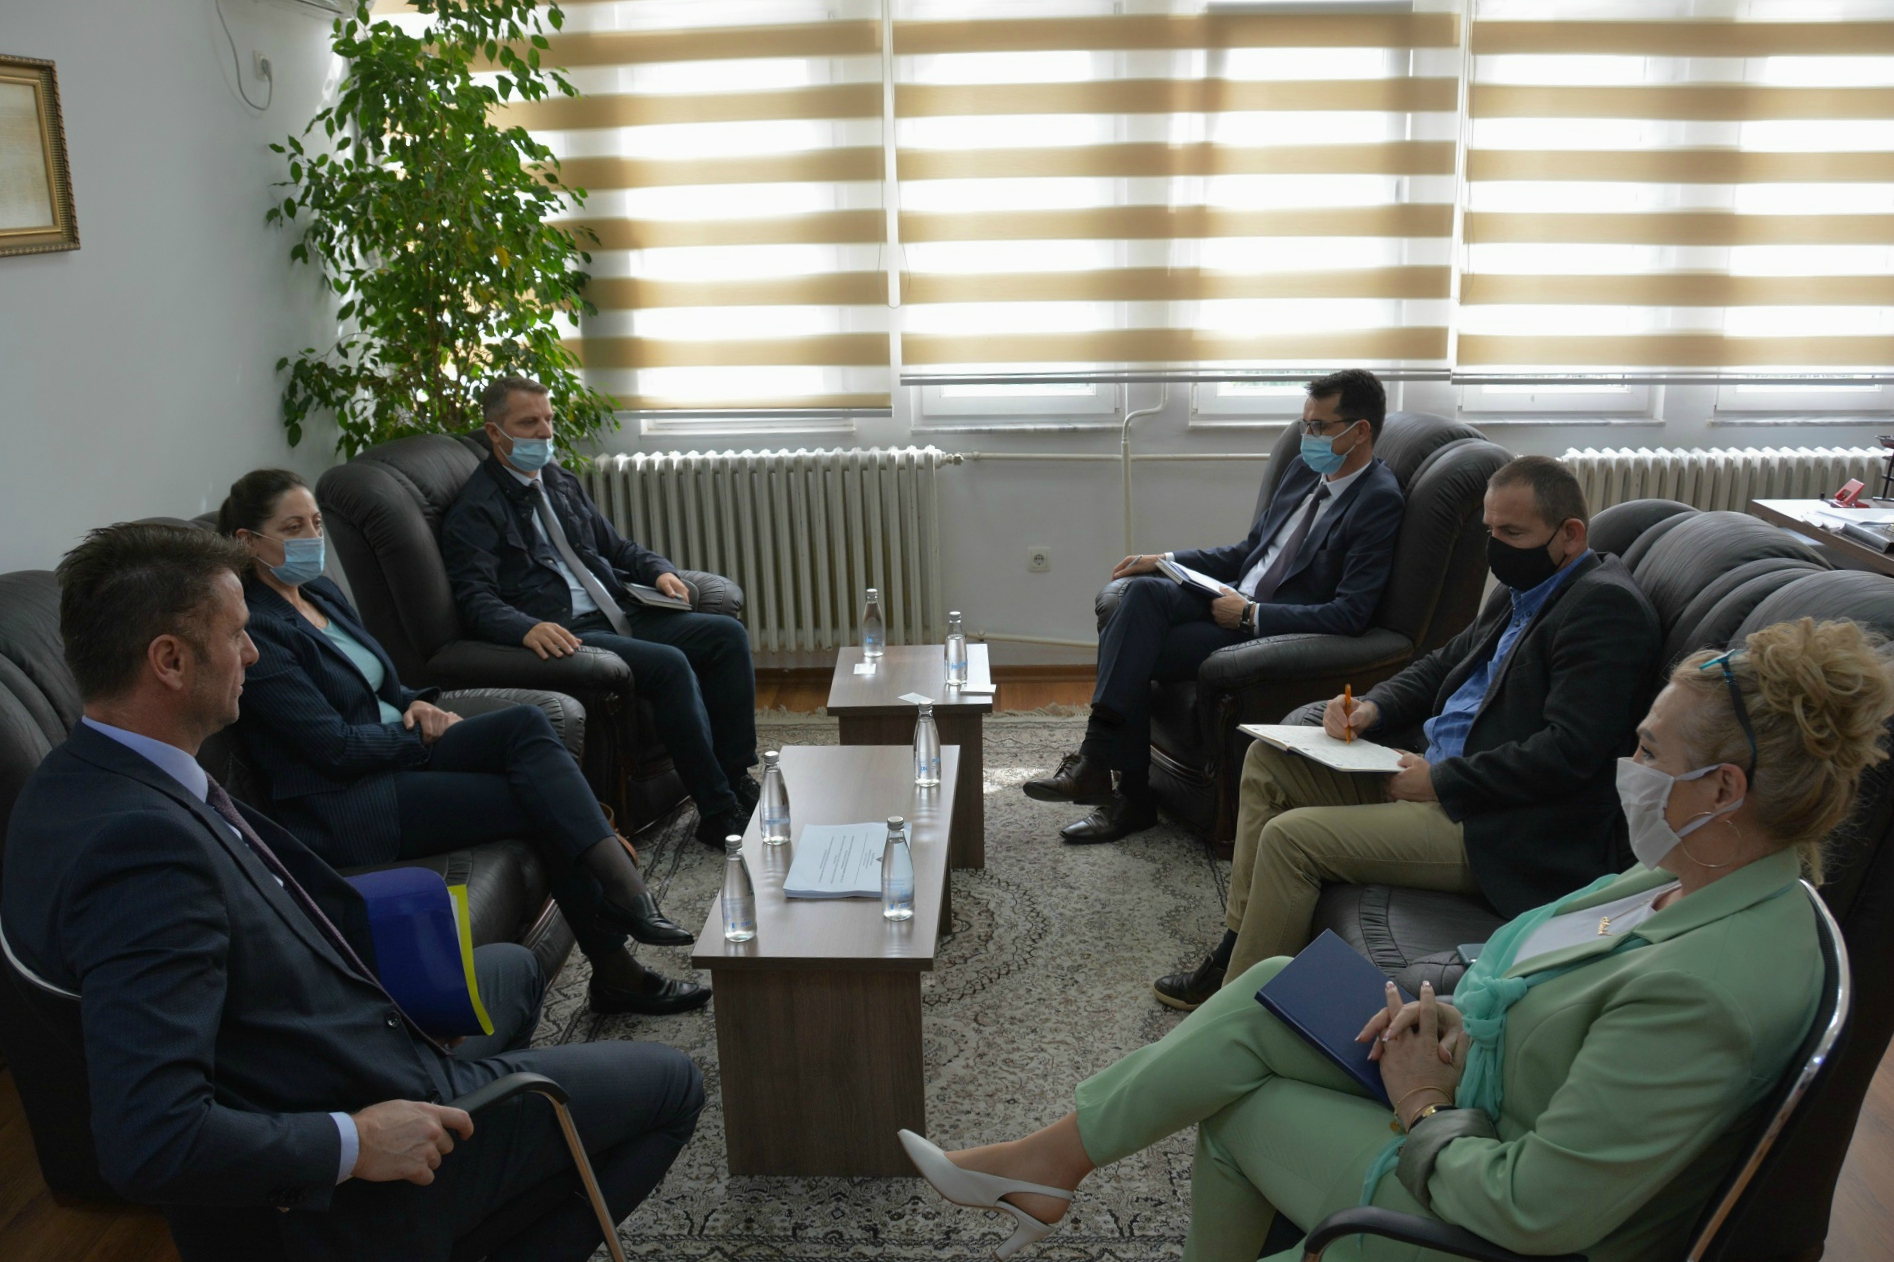 Mr. Çoçaj, KJC Chair, welcomed for a meeting the Director of the Banking Association